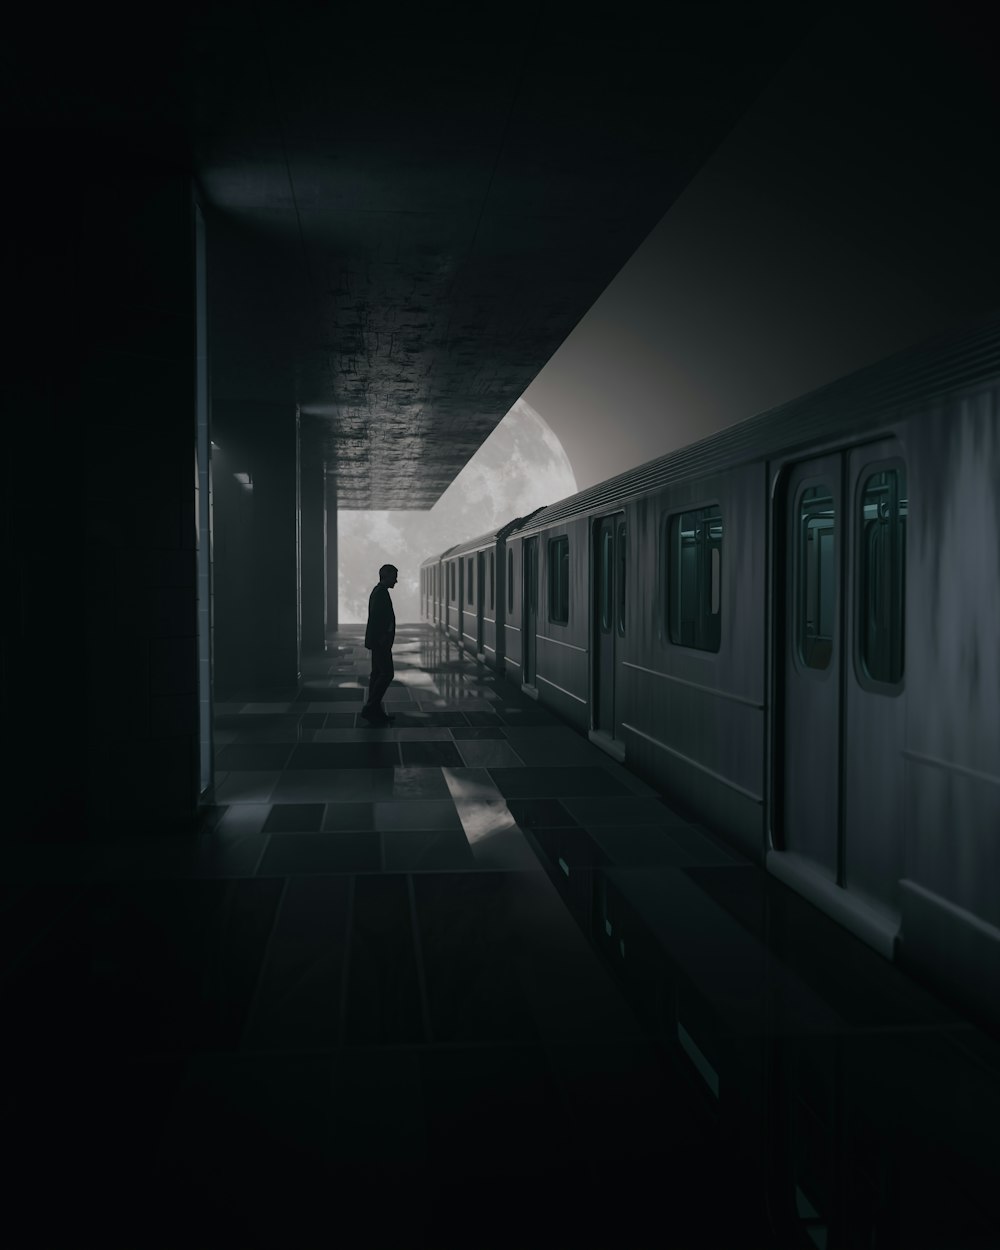 a person walking in a train station